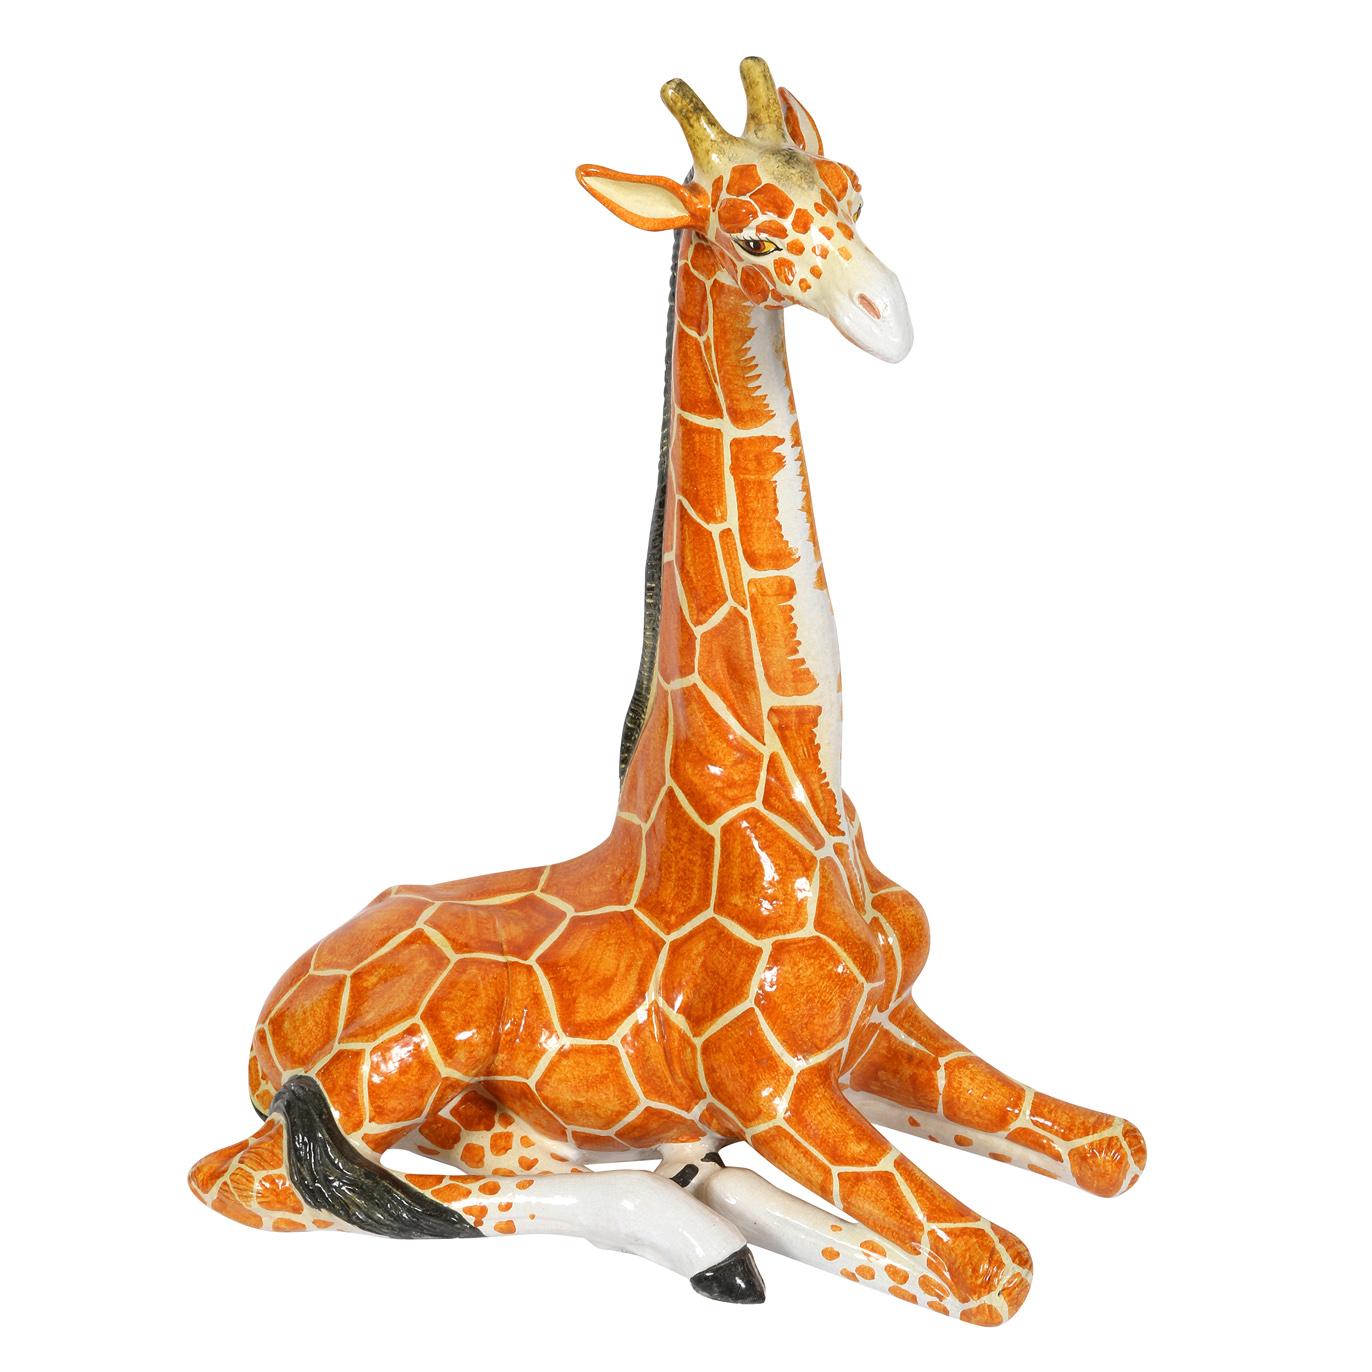 Add a bit of fun and whimsy to a room with this adorable ceramic giraffe. Sitting tall and proud, this creature was made it Italy. With beautiful color and shape, this would be perfect in an entry or at the hearth.